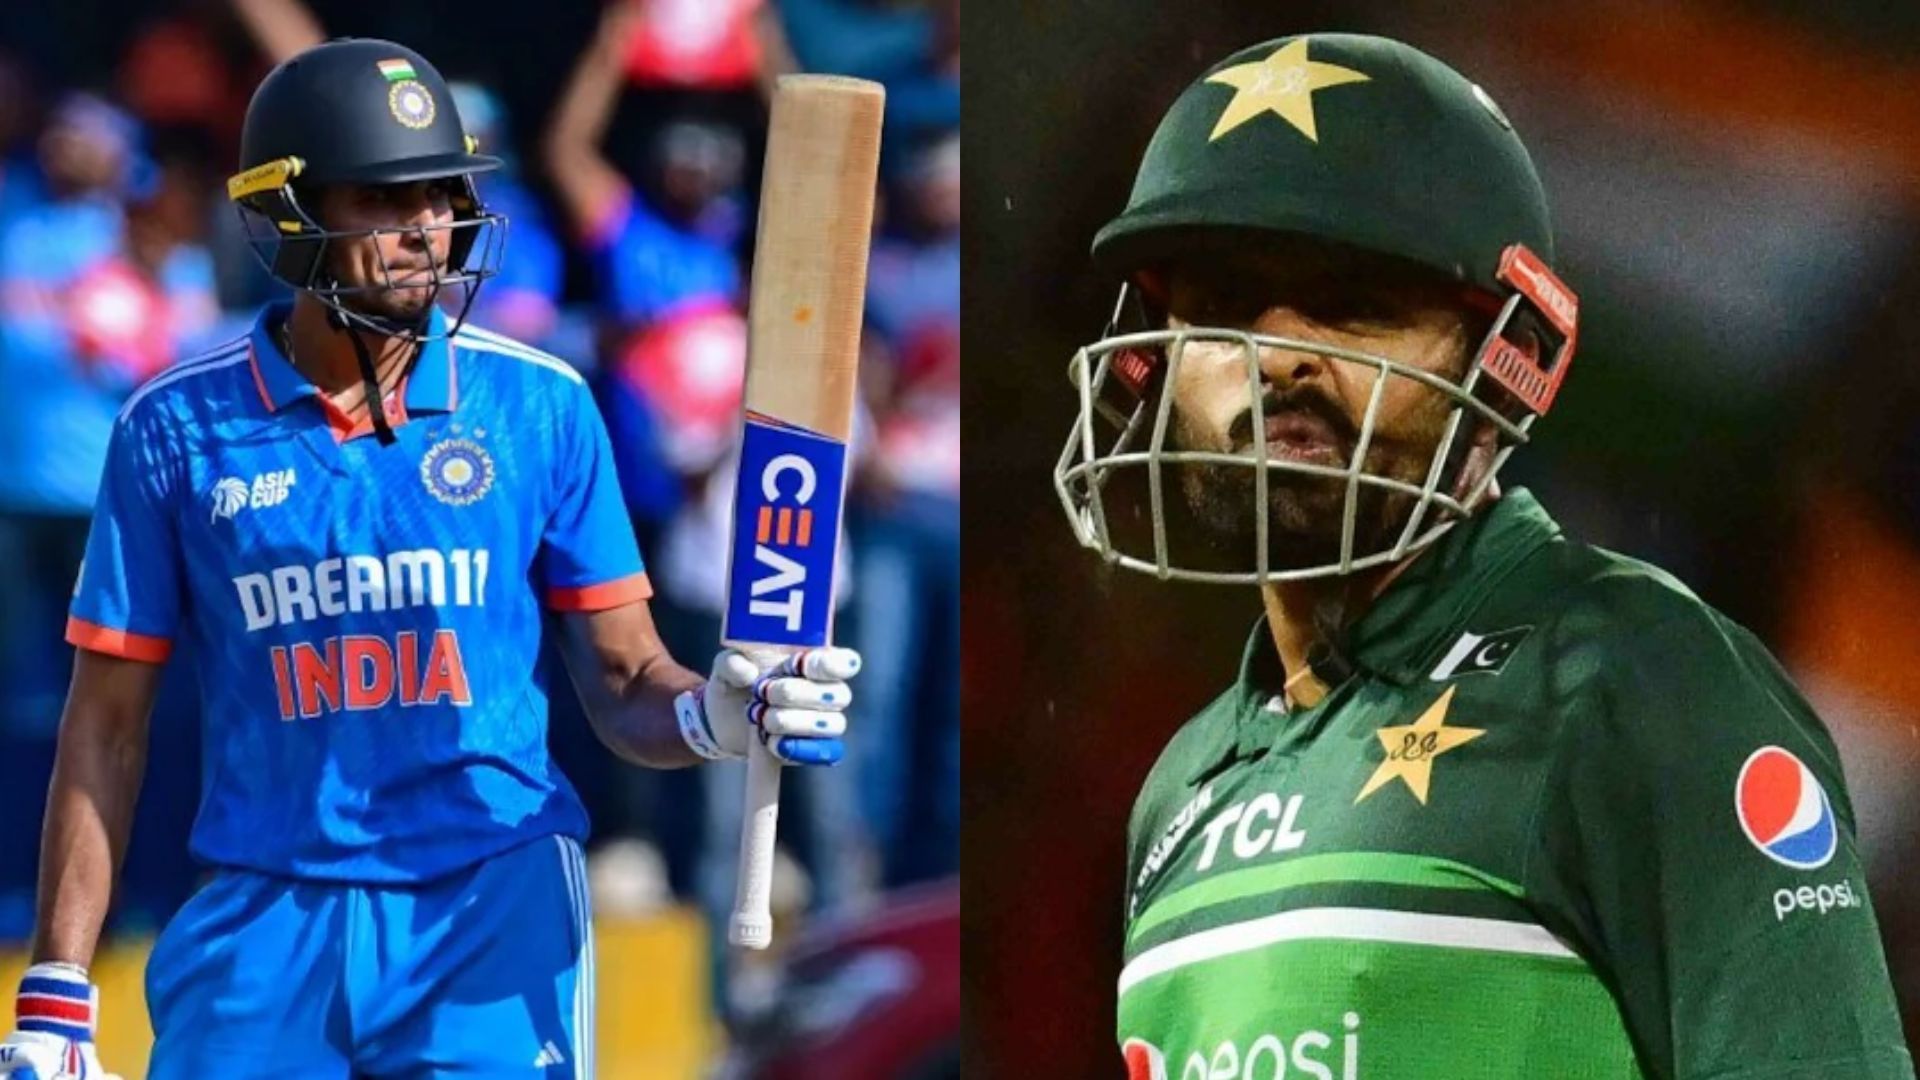 Shubman Gill (L) is just 5 rating points behind Babar Azam (P.C.:X)